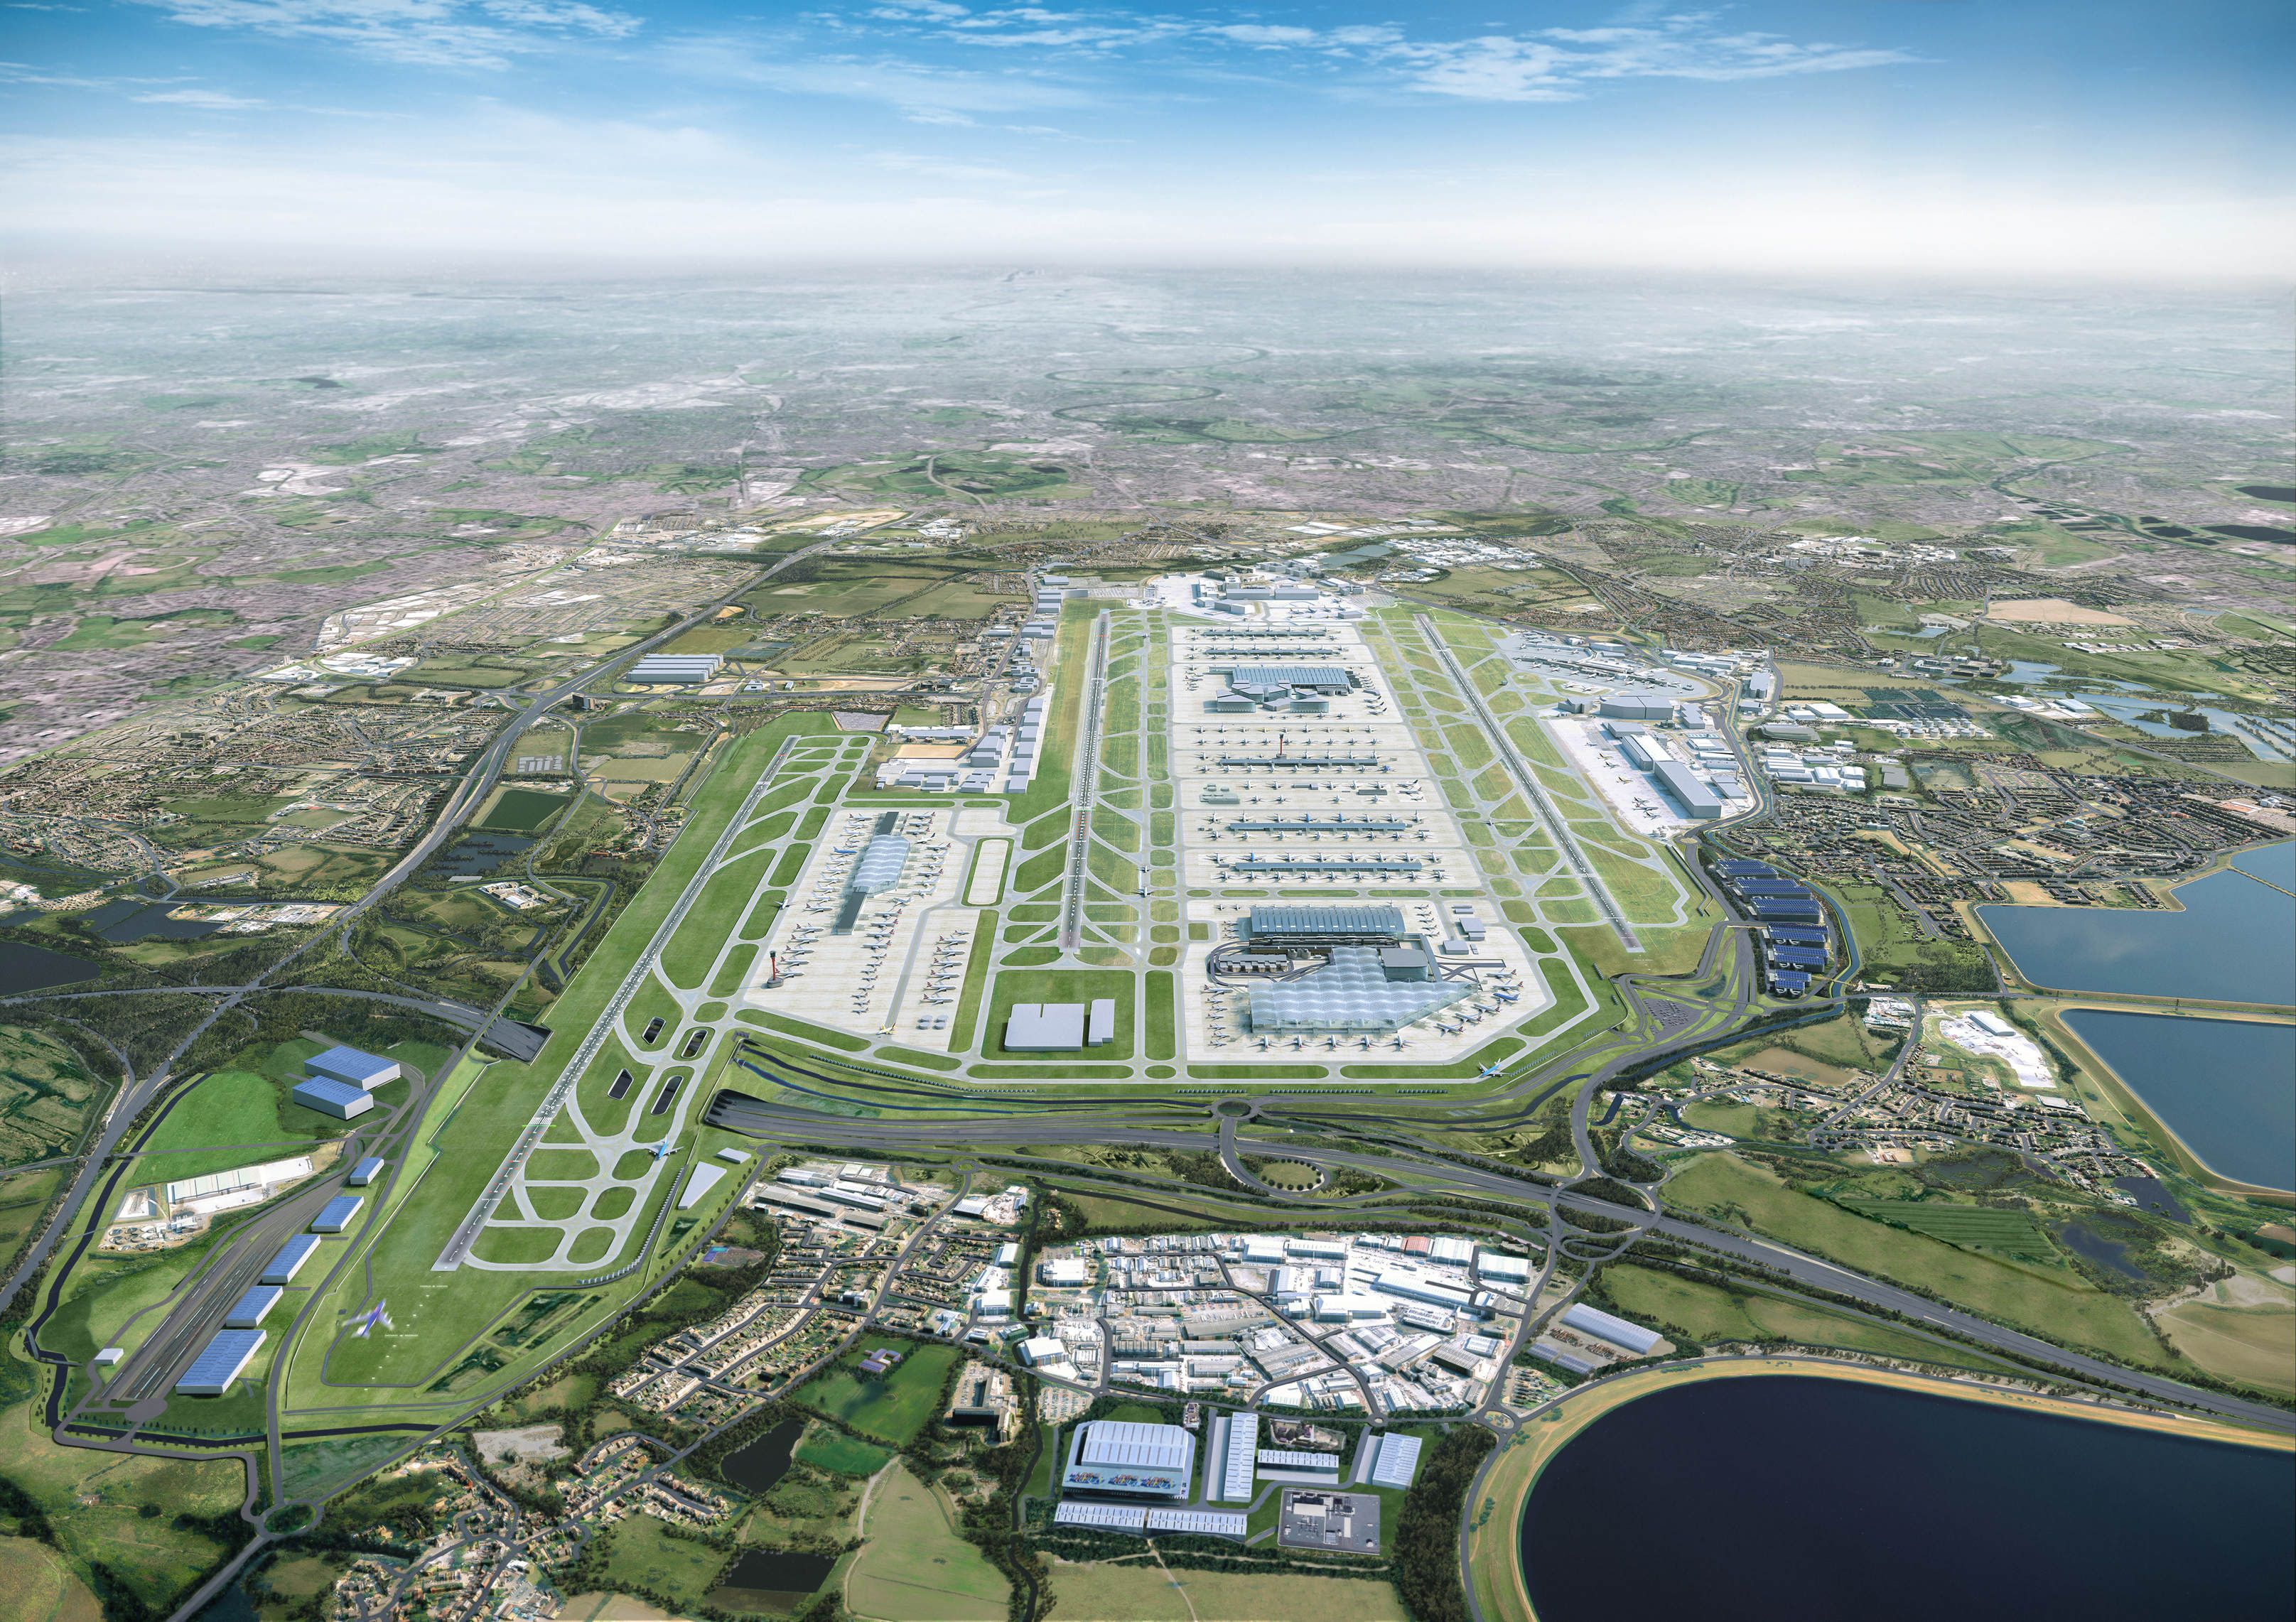 London Heathrow Airport from above